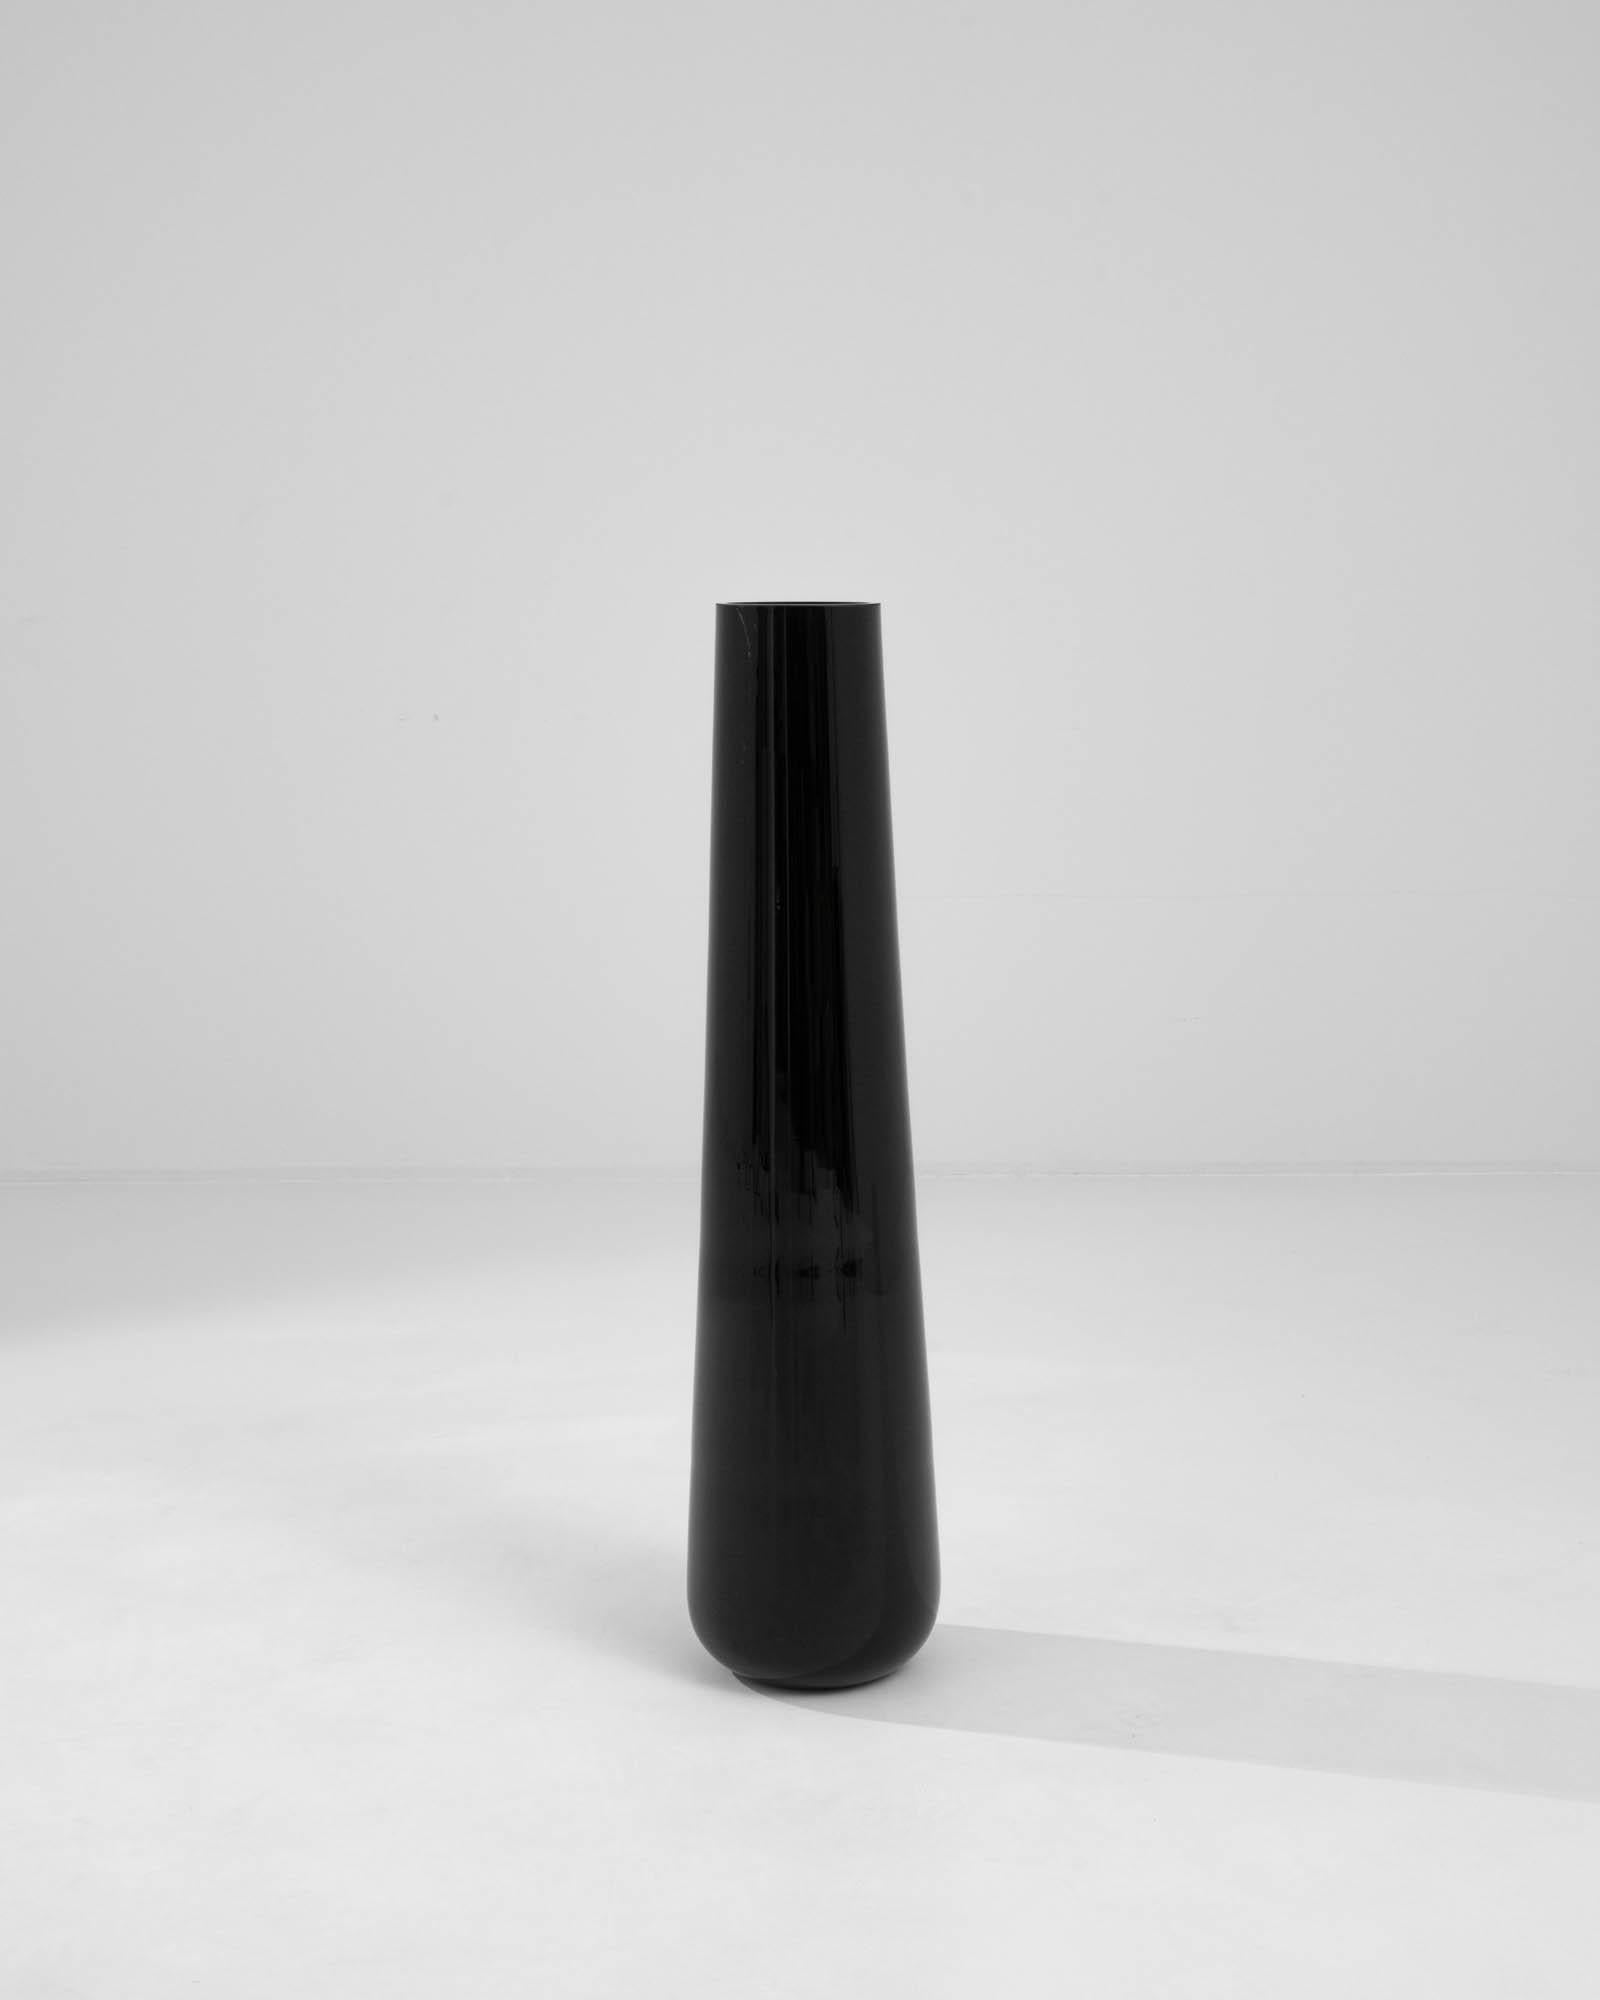 Embrace the understated sophistication of this 20th-century Czech glass vase. Dressed in a sleek black hue, the vase exudes an air of timeless elegance. Its elongated form gracefully ascends, adding a touch of refinement to any space. The simplicity